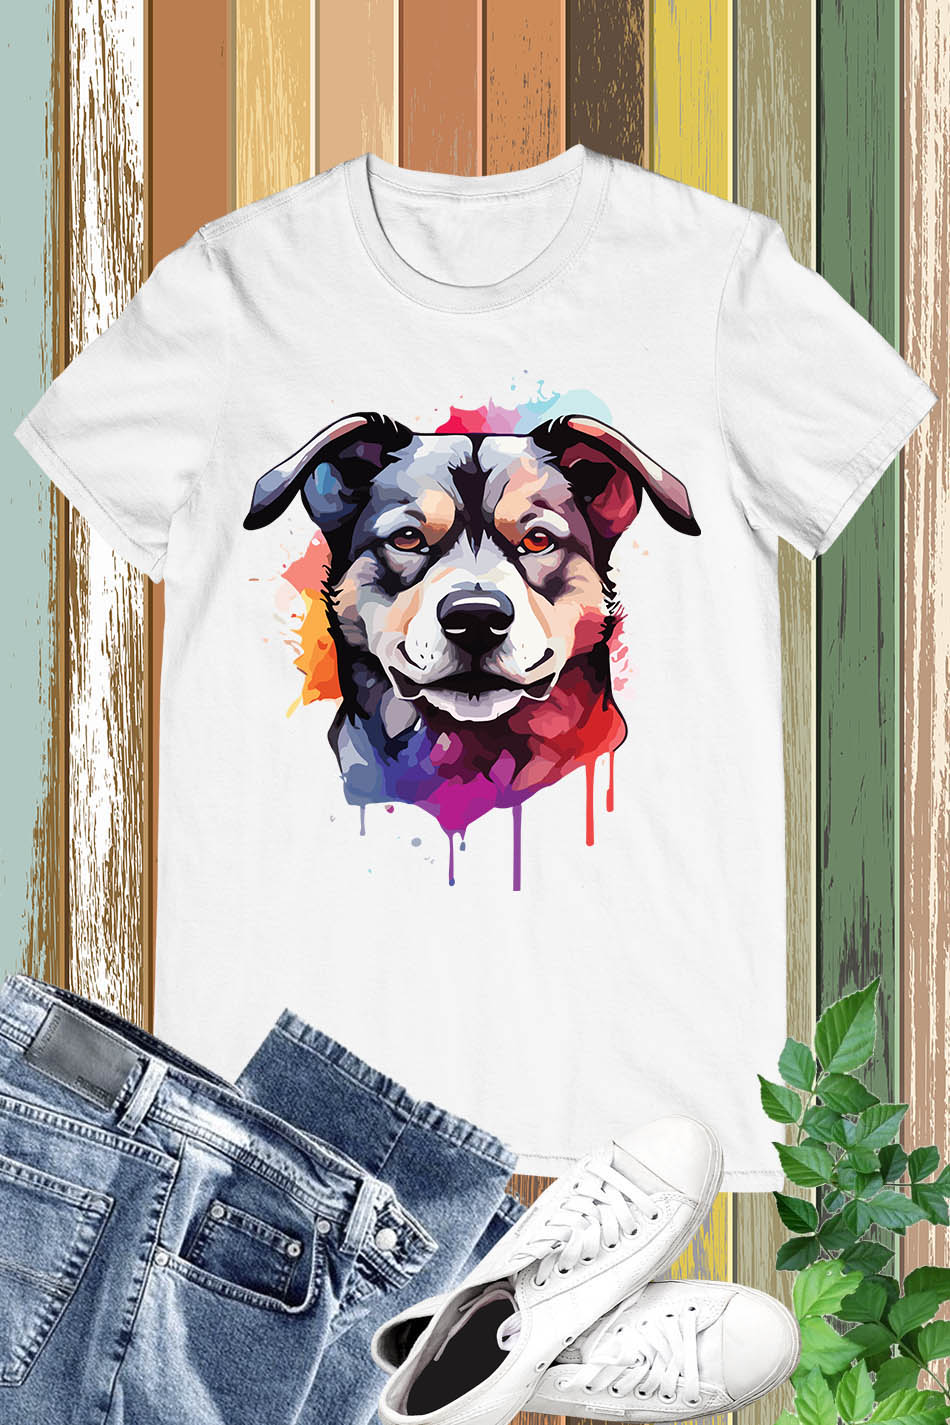 Experience the artistic beauty of our Water Color Dog T-Shirt. Made from the highest quality materials, this t-shirt features a vibrant watercolor dog design that is both stylish and comfortable. Express your love for dogs and art with this unique t-shirt.